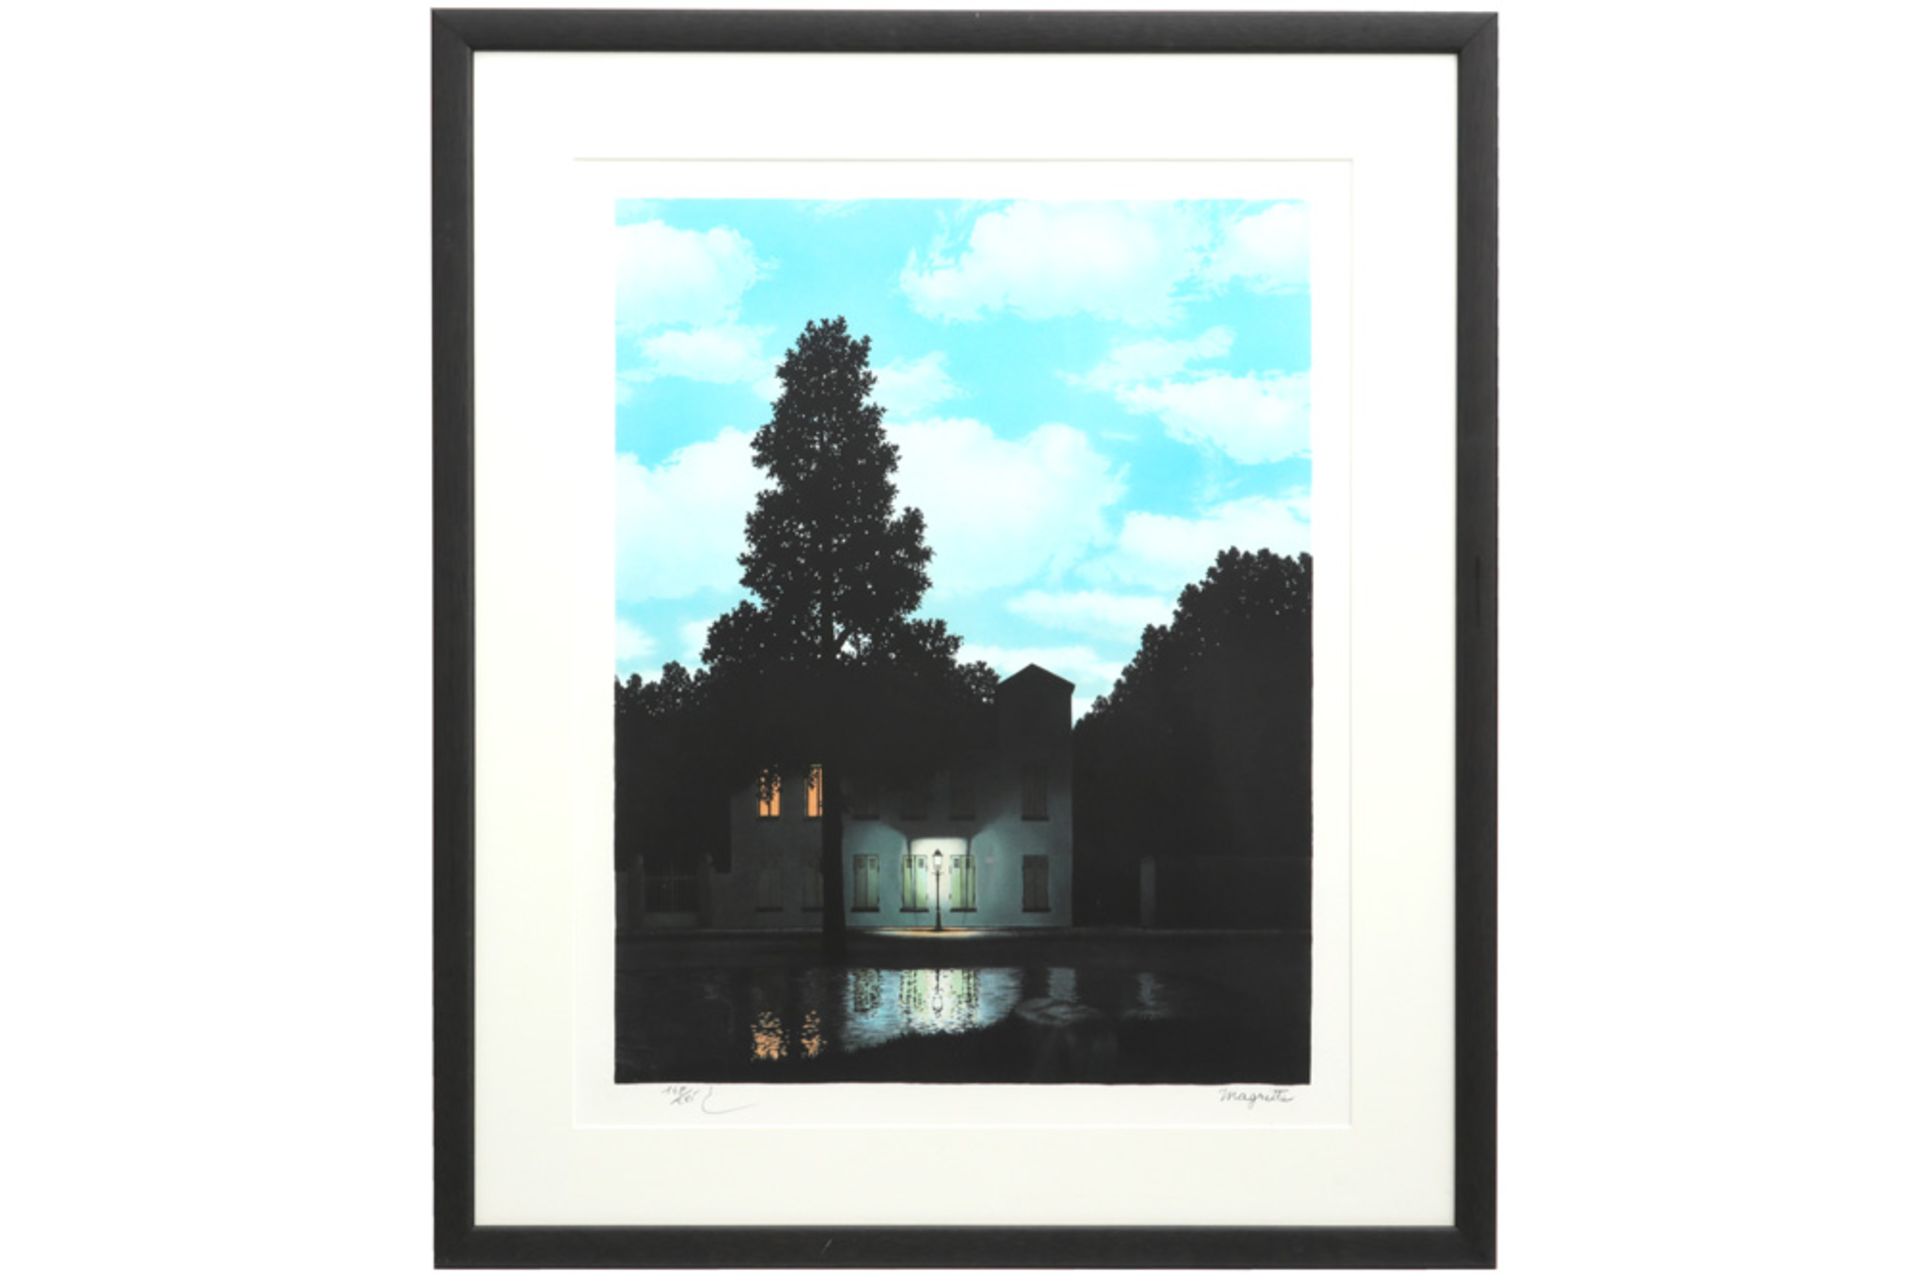 René Magritte "L'Empire des lumières" offset lithograph printed in colors - with stamped signature - Image 3 of 3